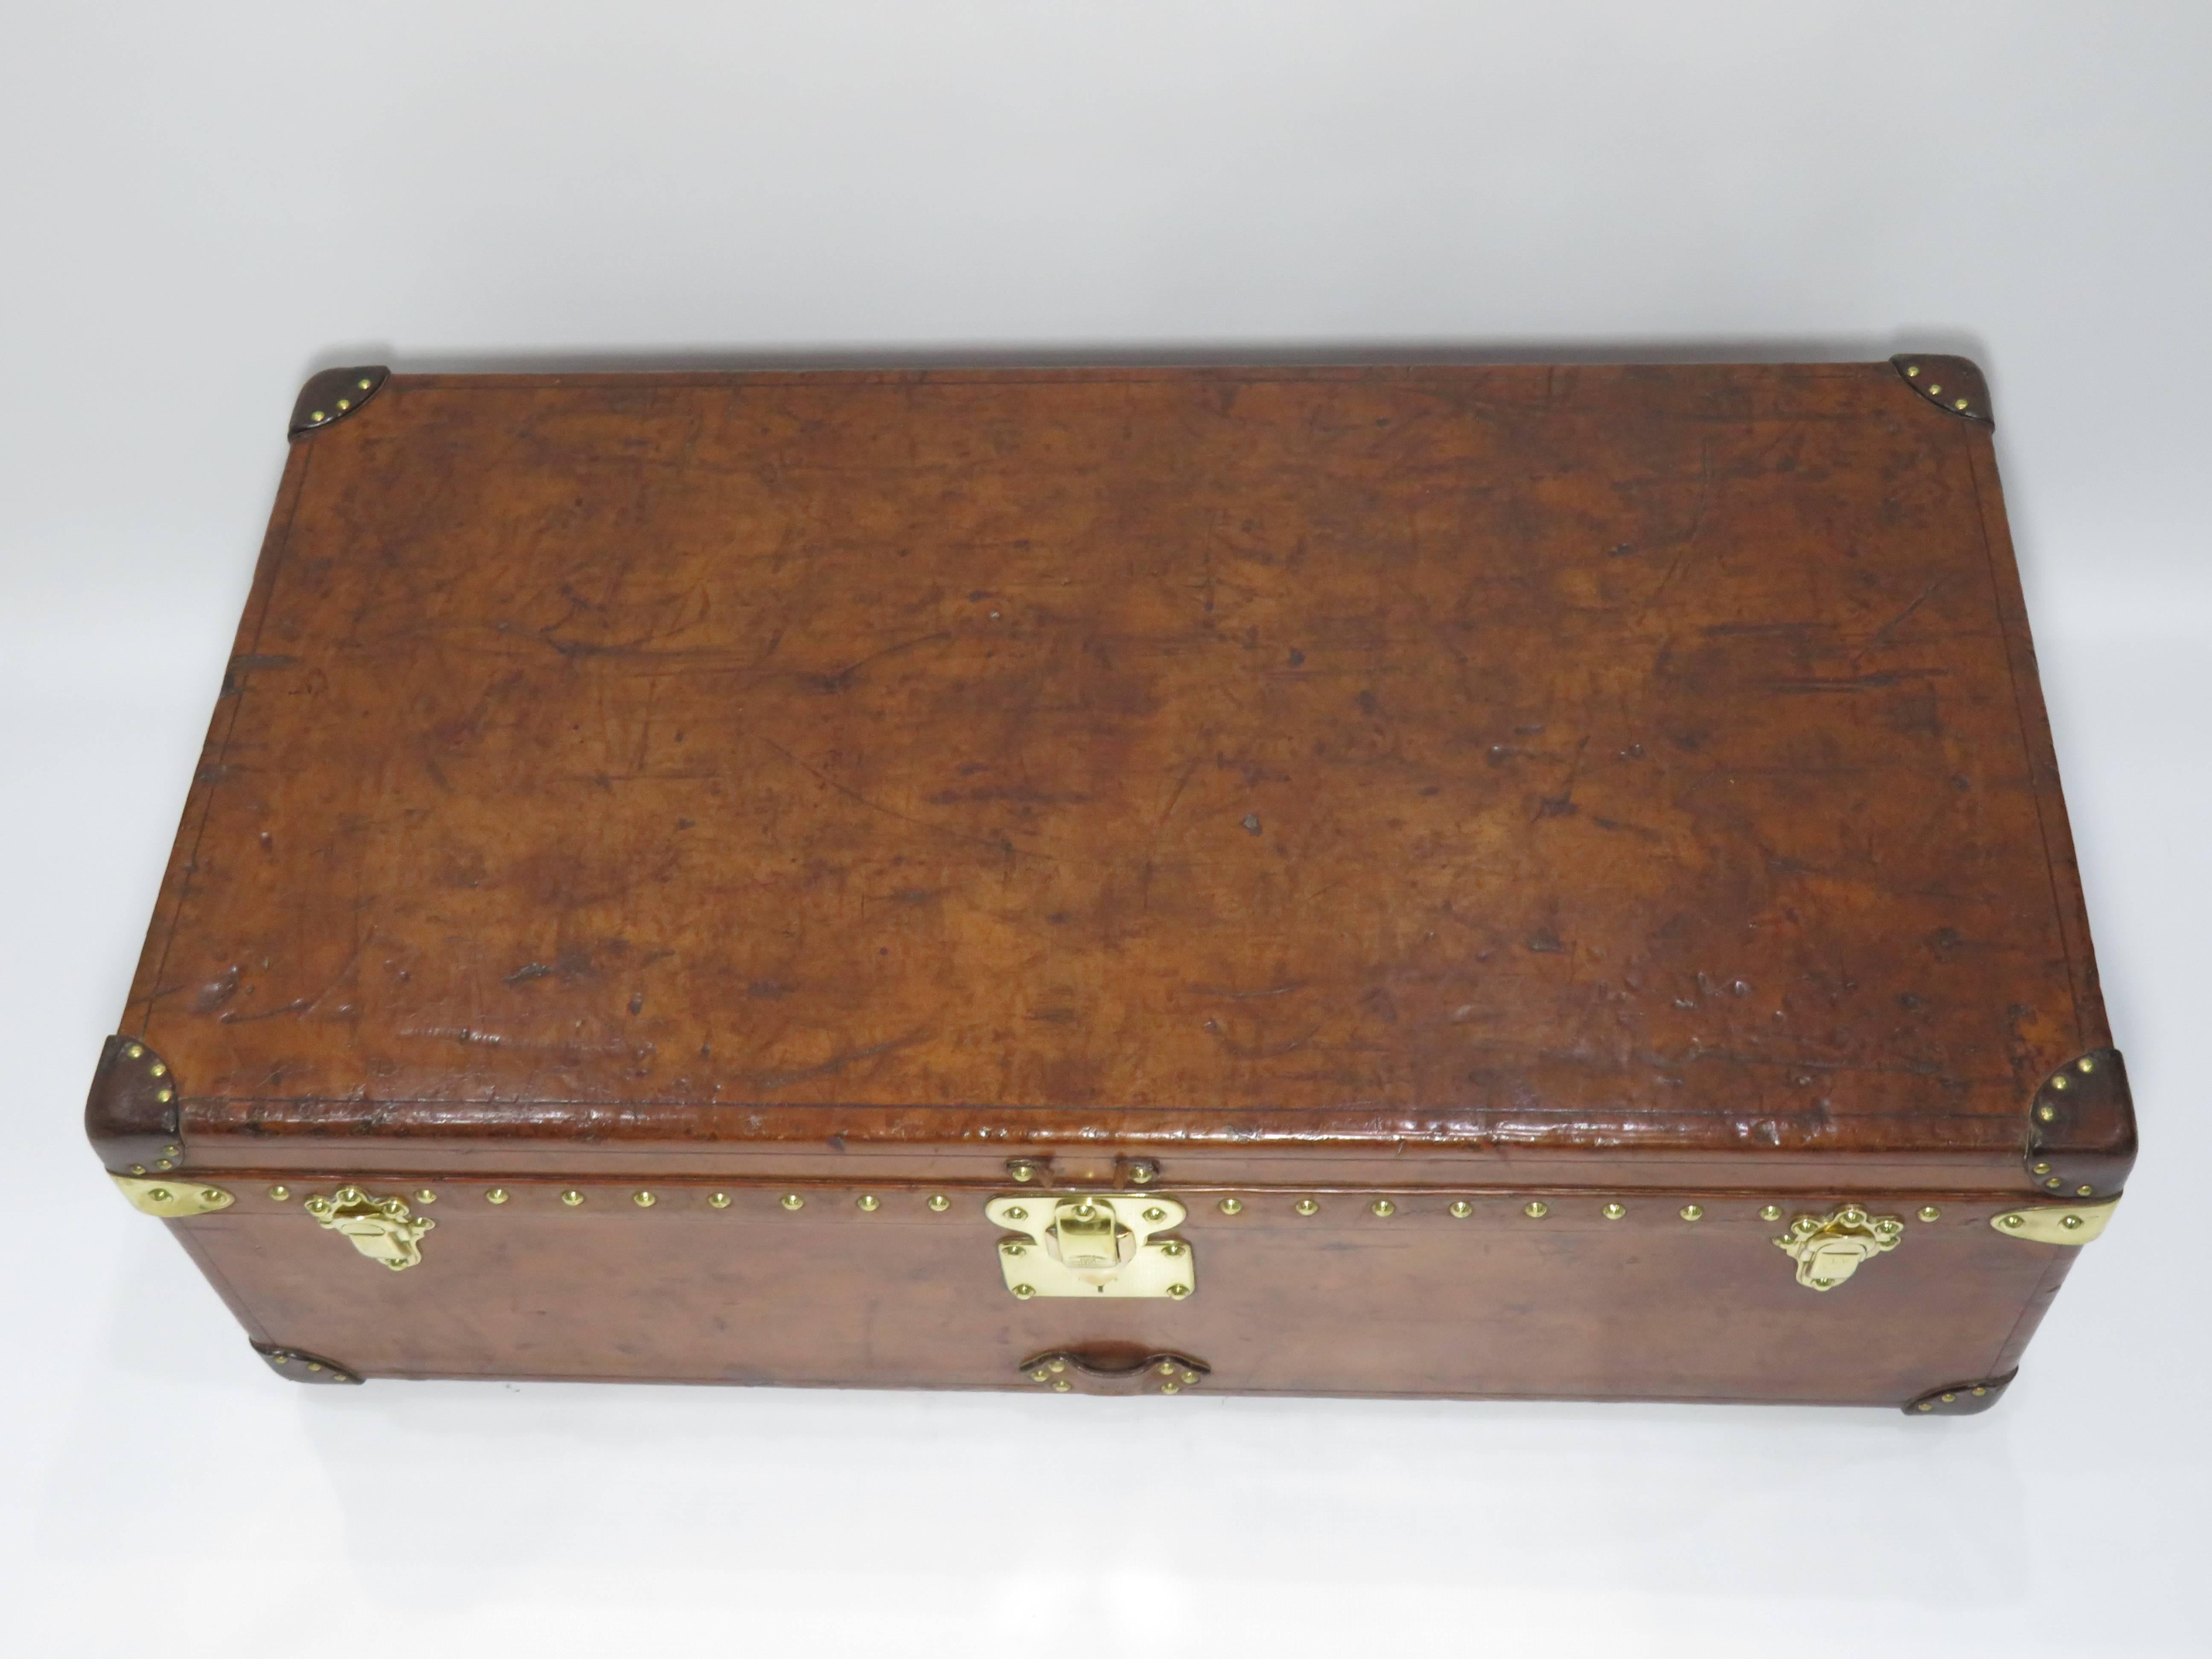 For sale a very good example of an early 20th century Louis Vuitton cowhide leather cabin trunk
immaculate color and patina, a trunk that has aged really well and has been carefully cleaned and polished with brass hardware.